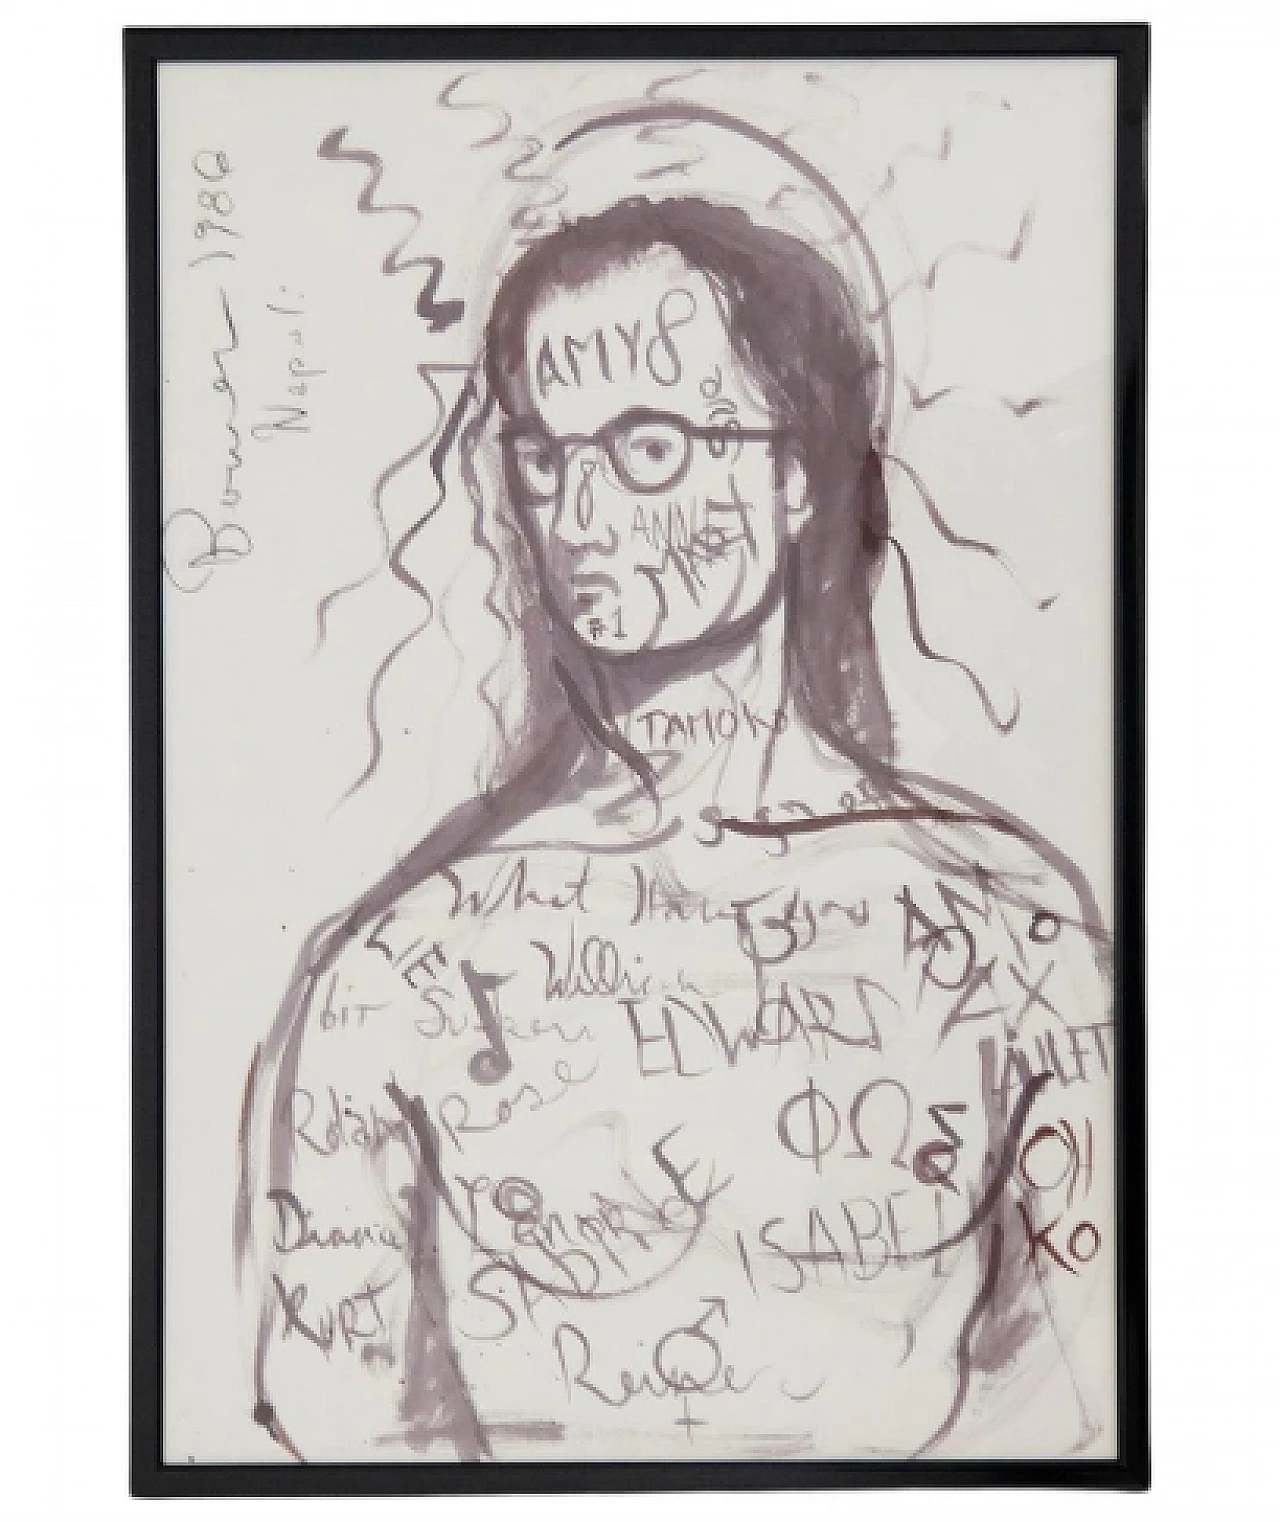 David Bowes, untitled, drawing on paper, 1986 1